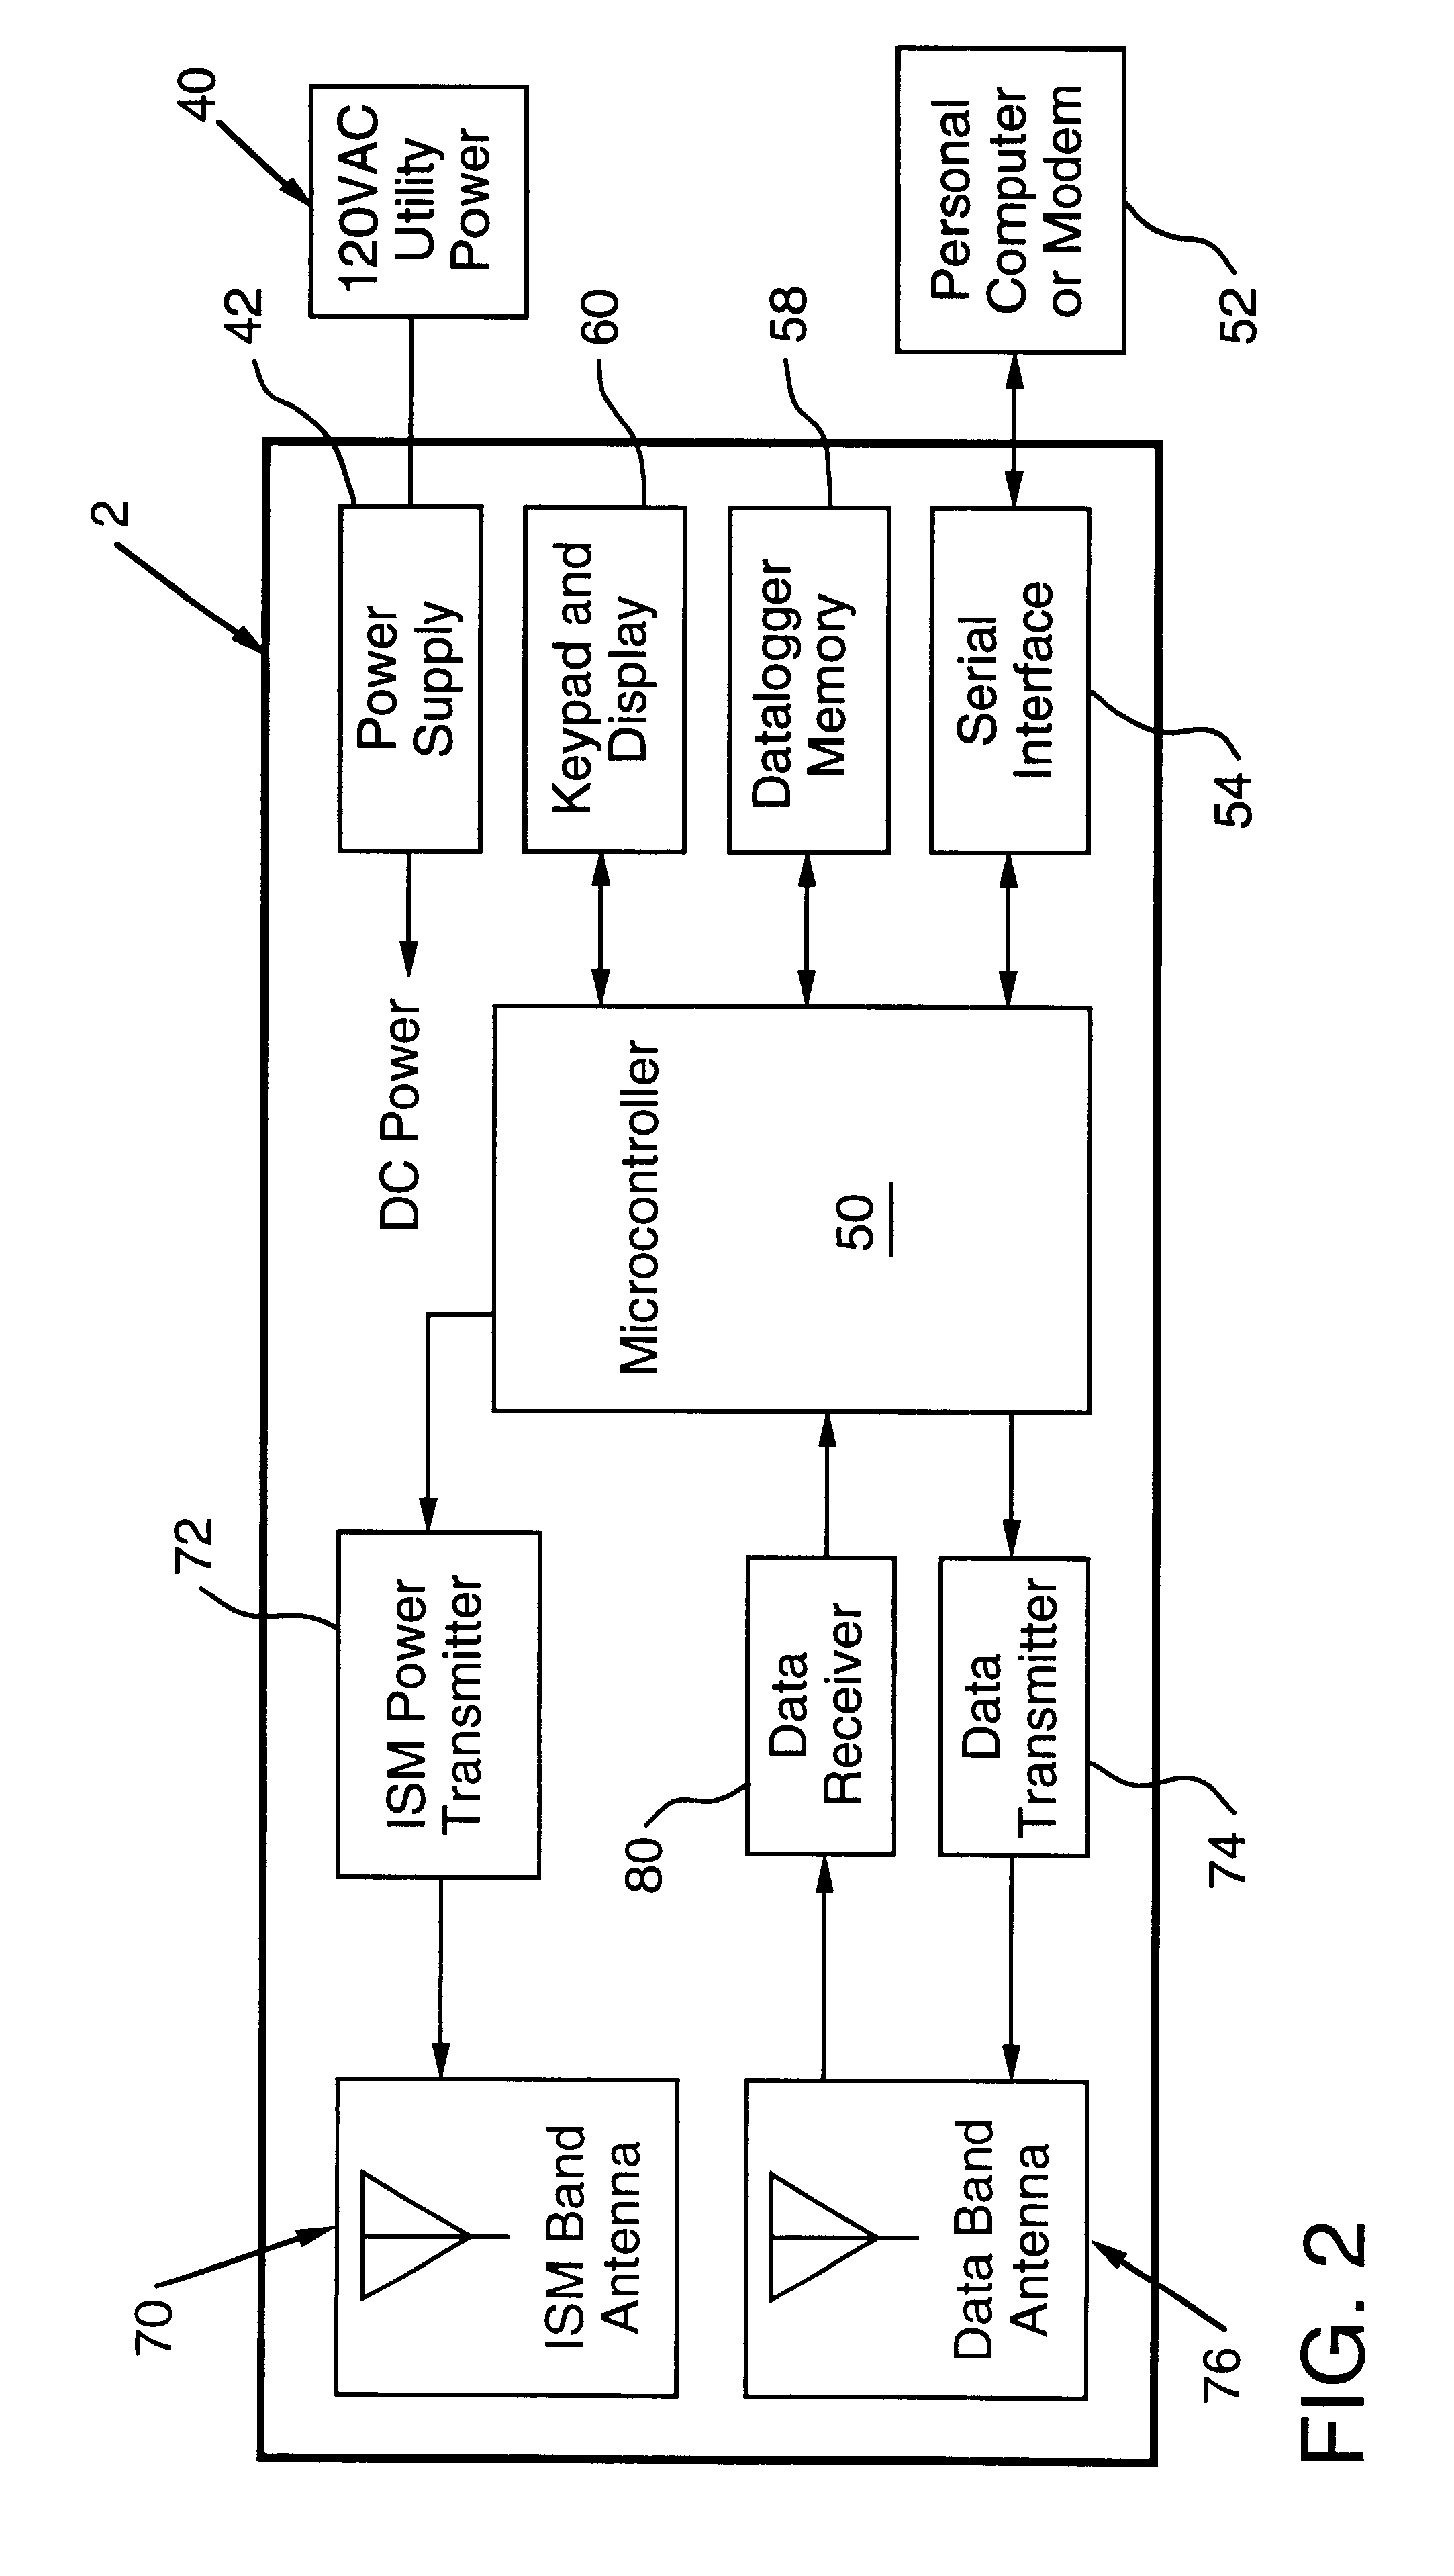 Apparatus for energizing a remote station and related method